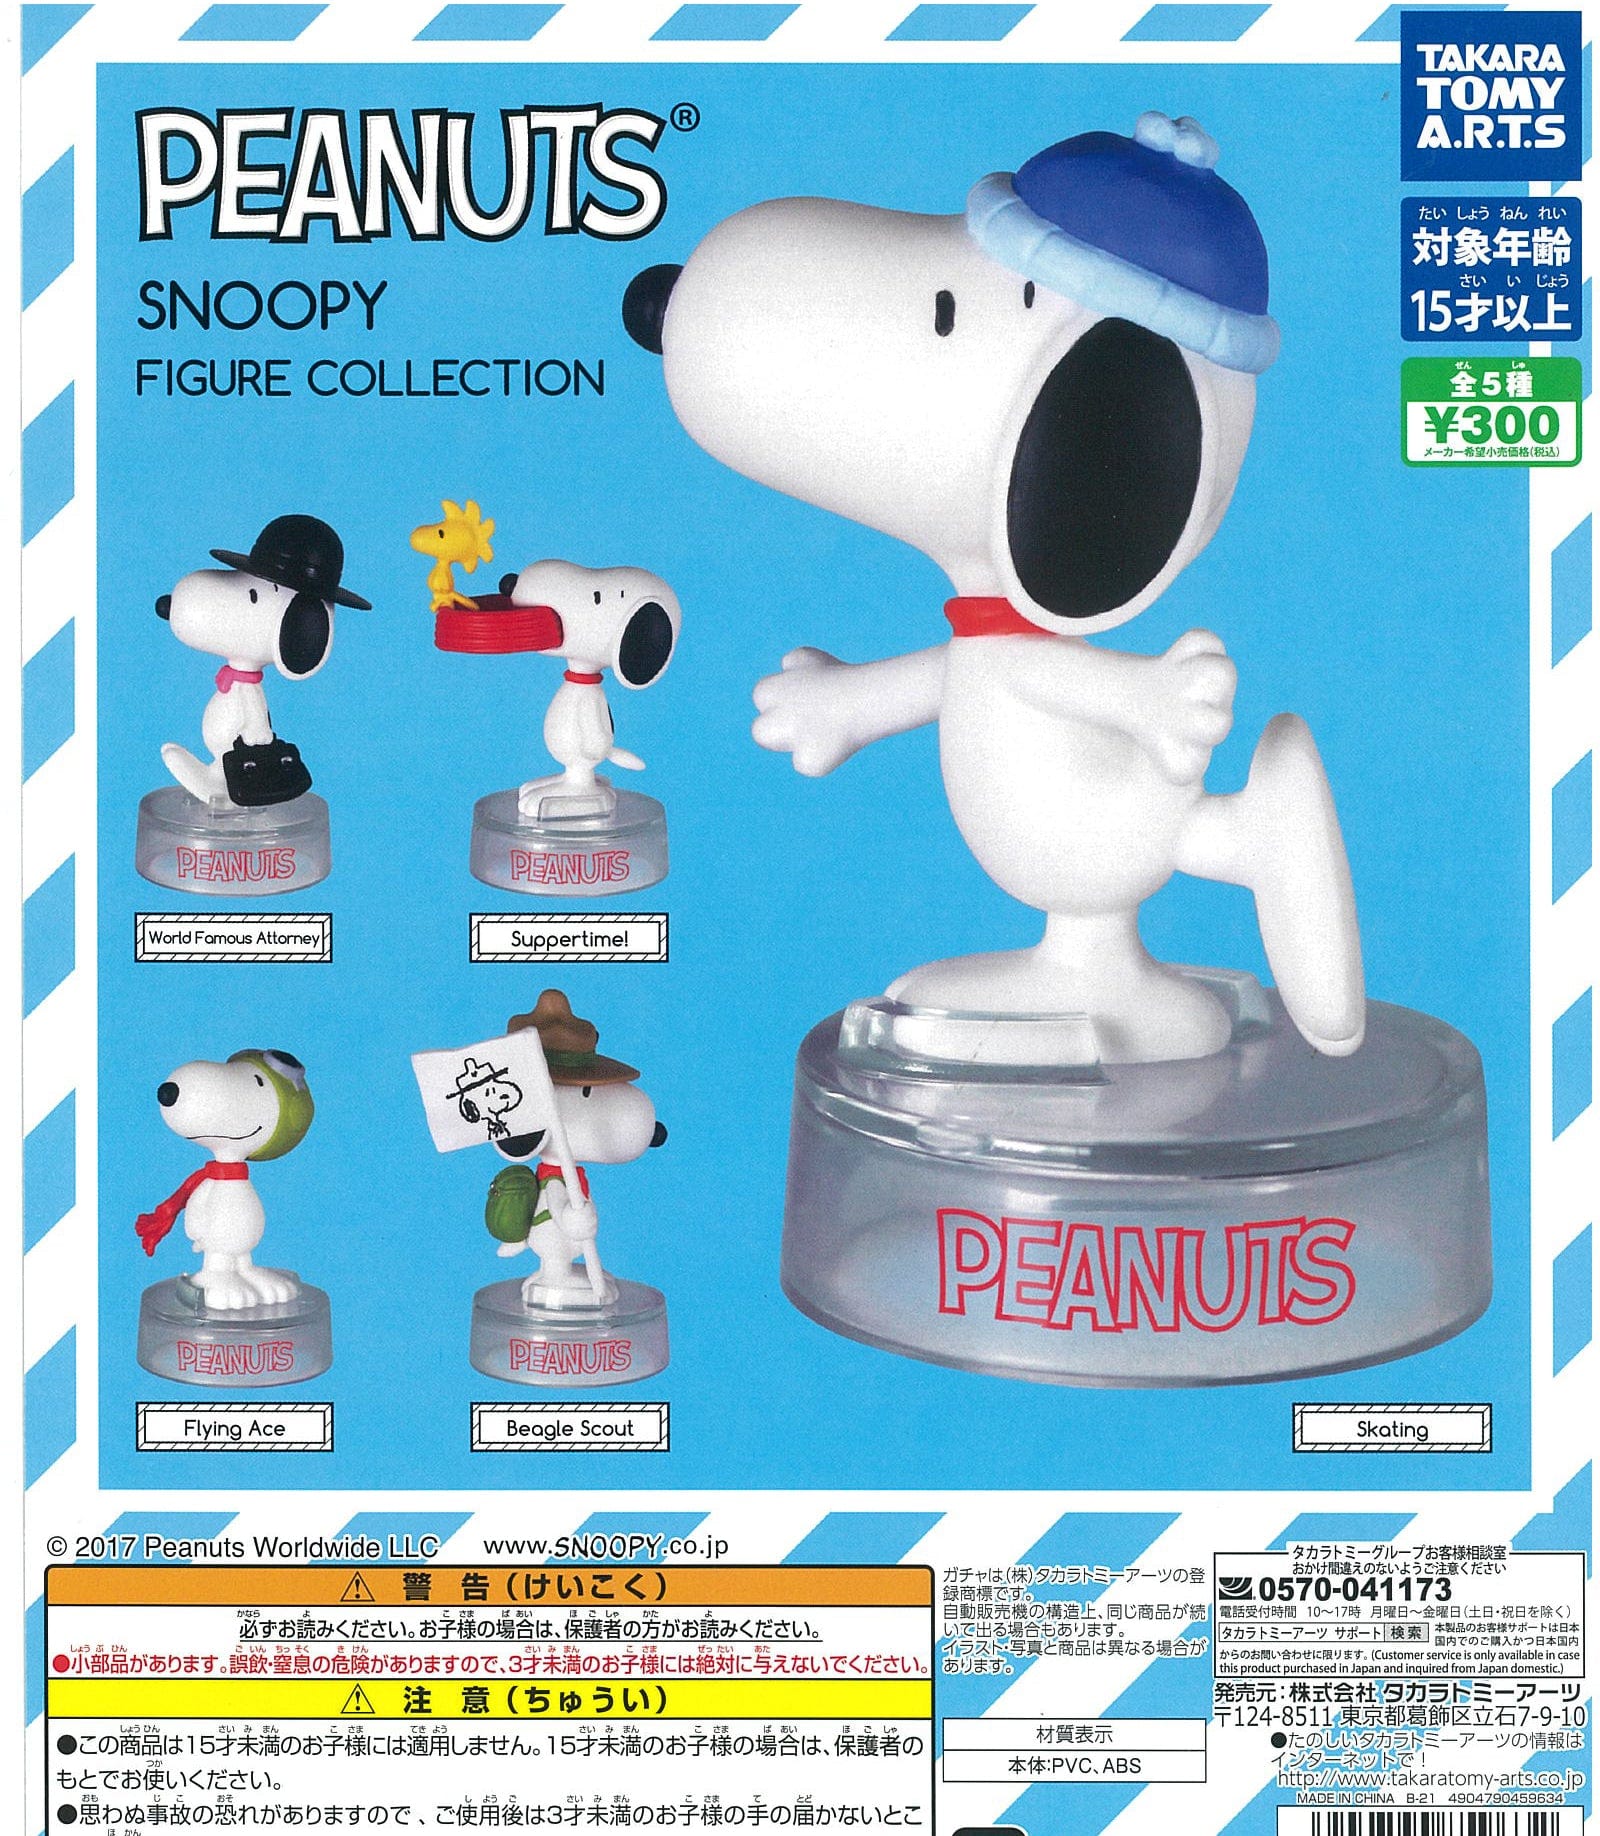 Takara Tomy A.R.T.S CP1177 Peanuts Snoopy Figure Collection